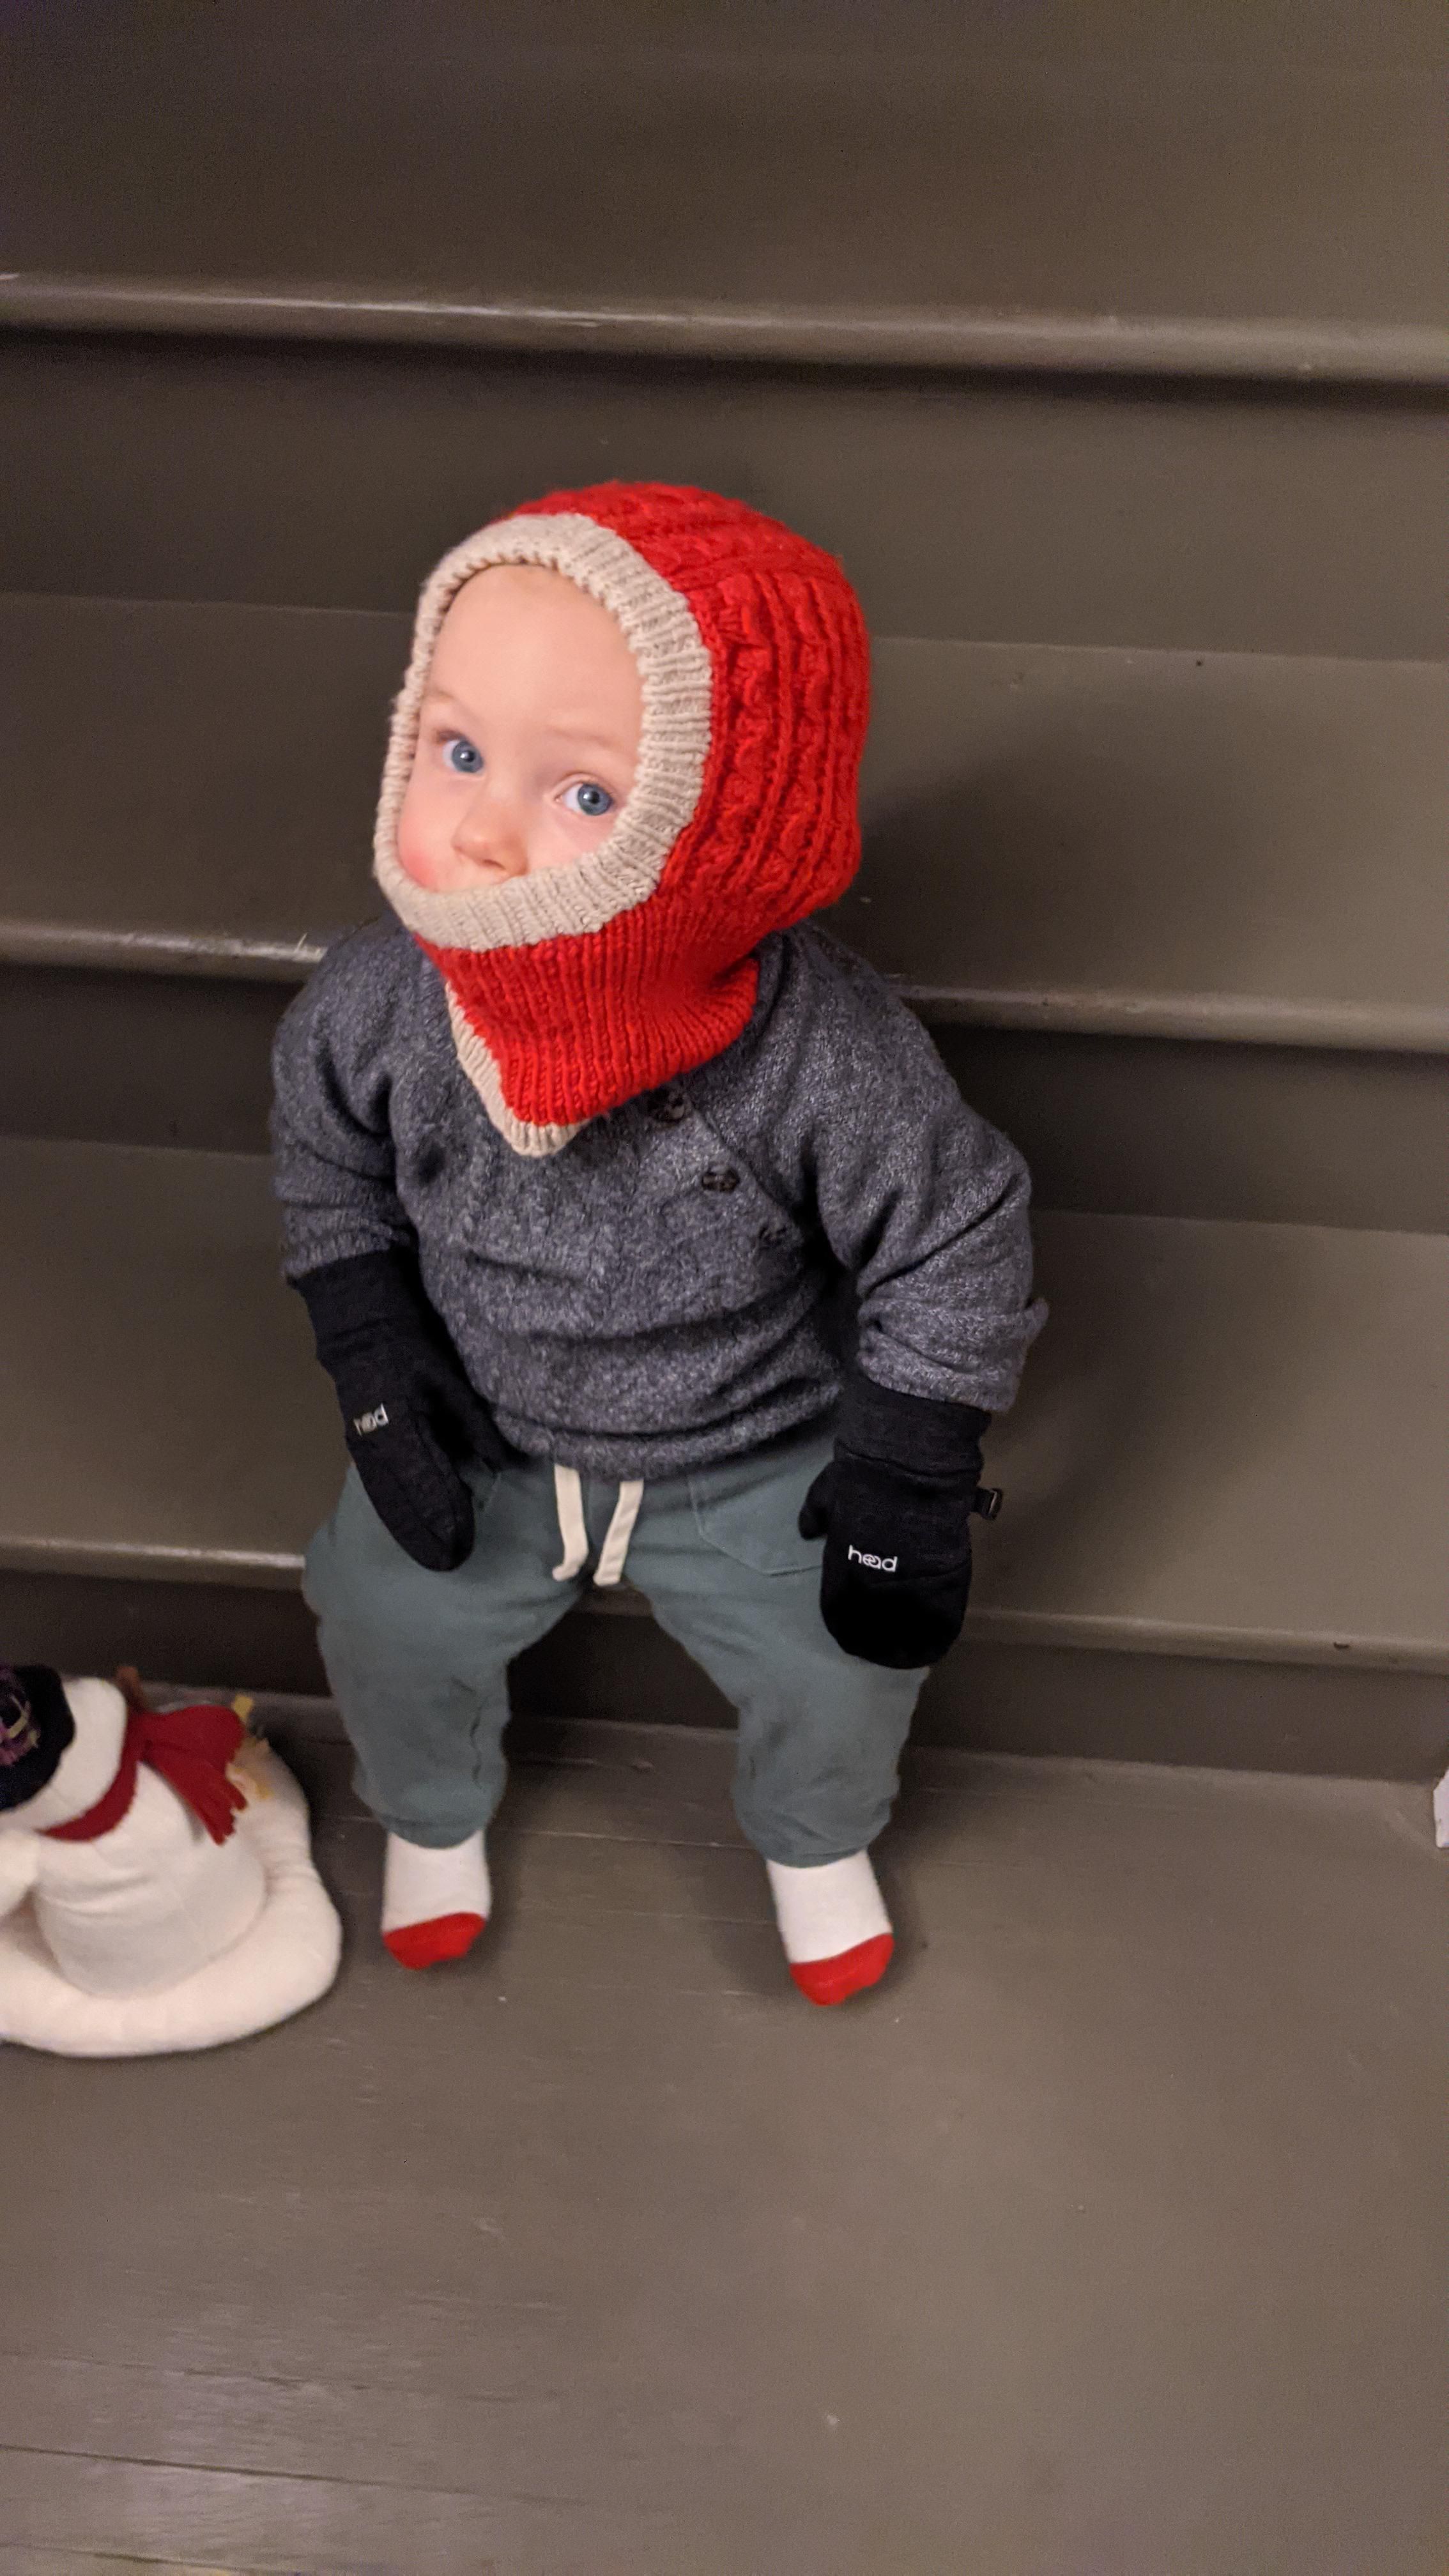 Getting my nephew ready to go out in the snow.